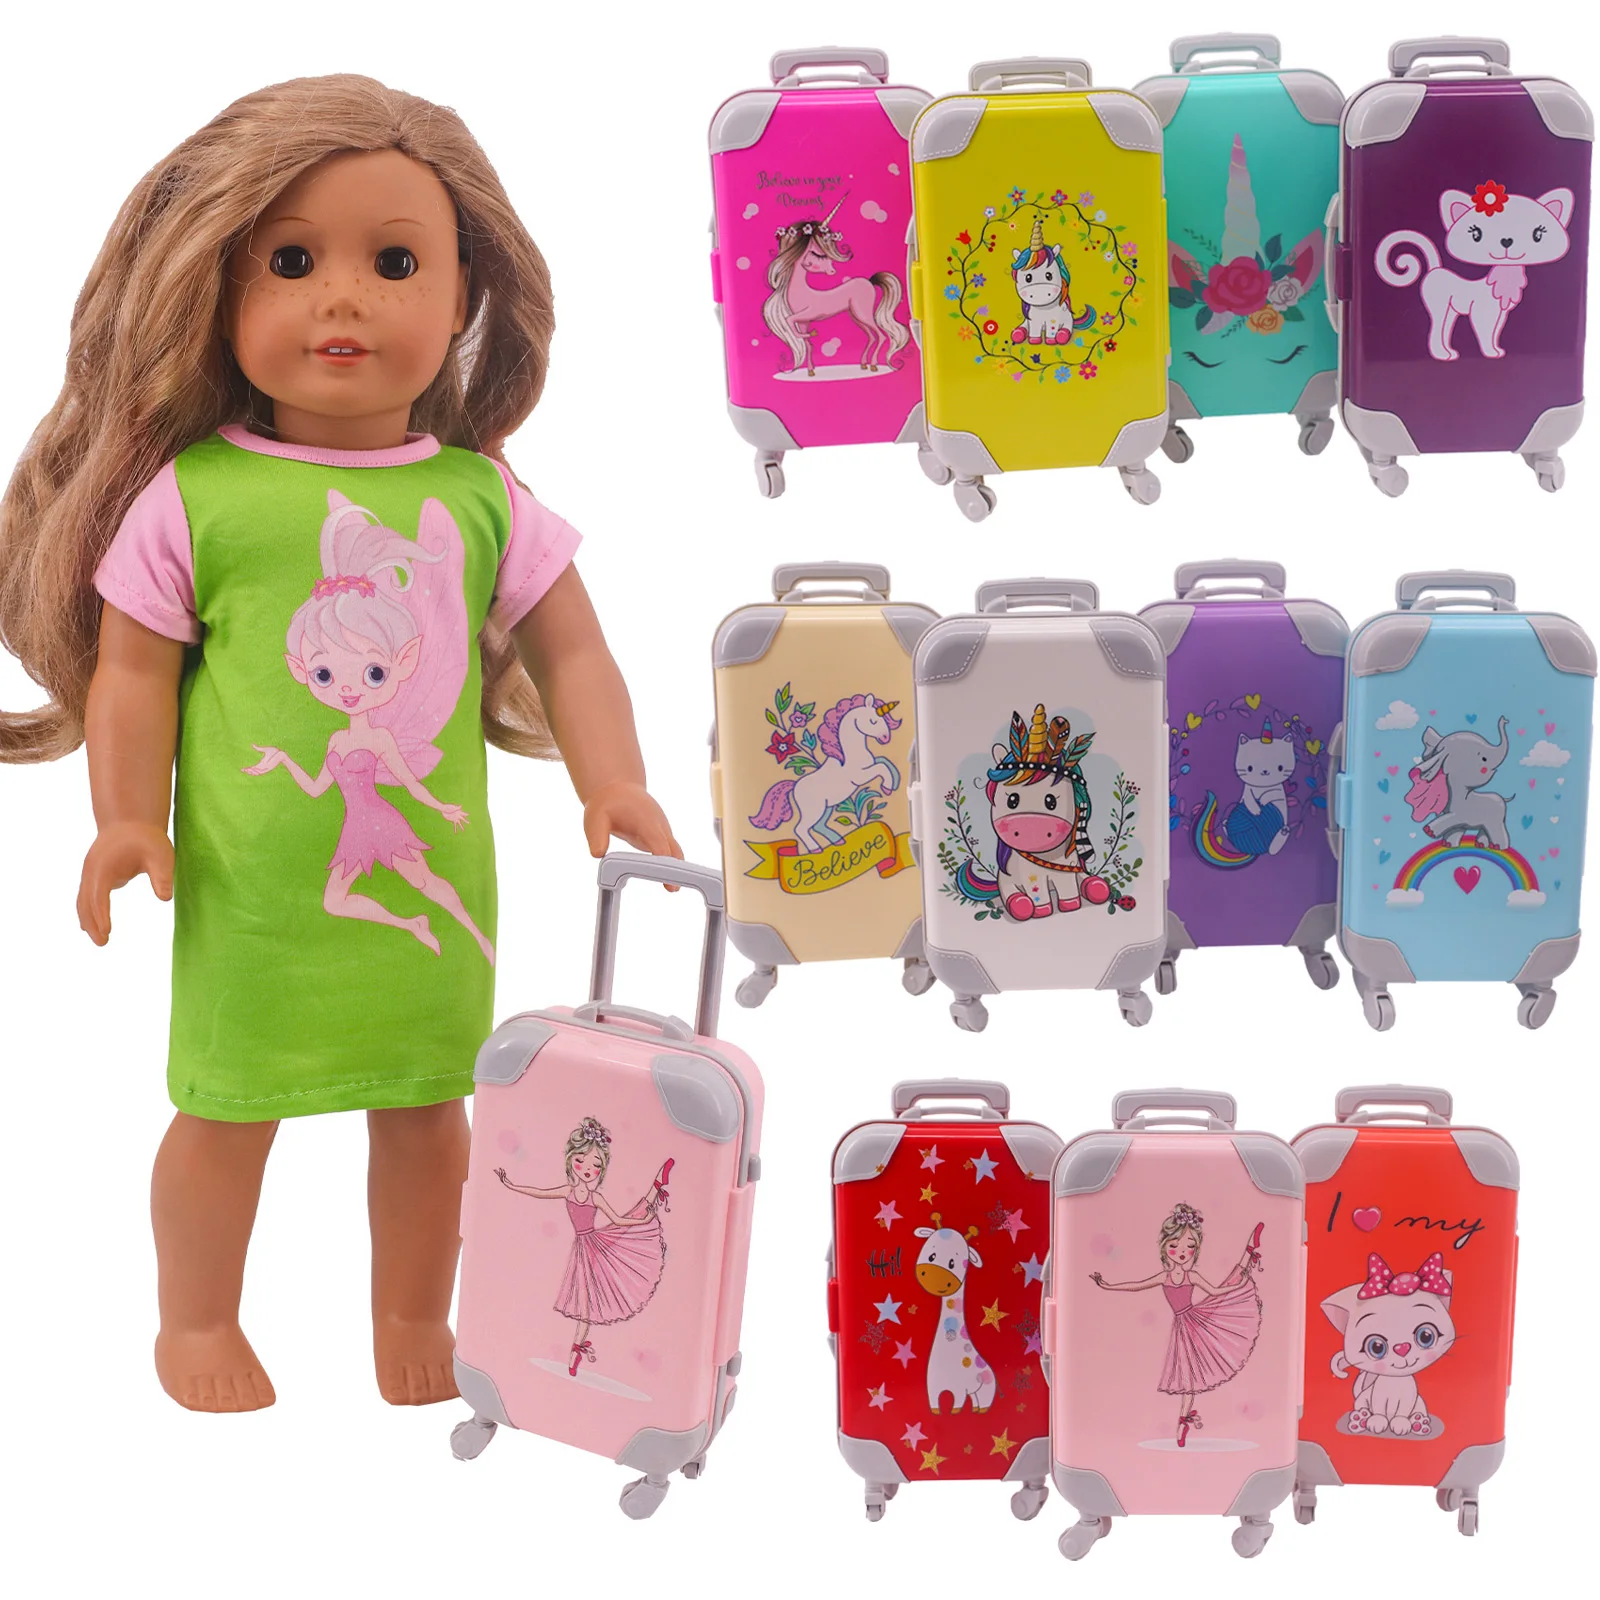 Dollhouse Printed Style Doll Suitcase Fit 18 Inch American And 43cm Reborn Baby Doll Accessories ,Our Generation ,DIY Toys luggage connection strap two add a bag suitcase straps belt adjustable travel attachment accessories for connect luggage